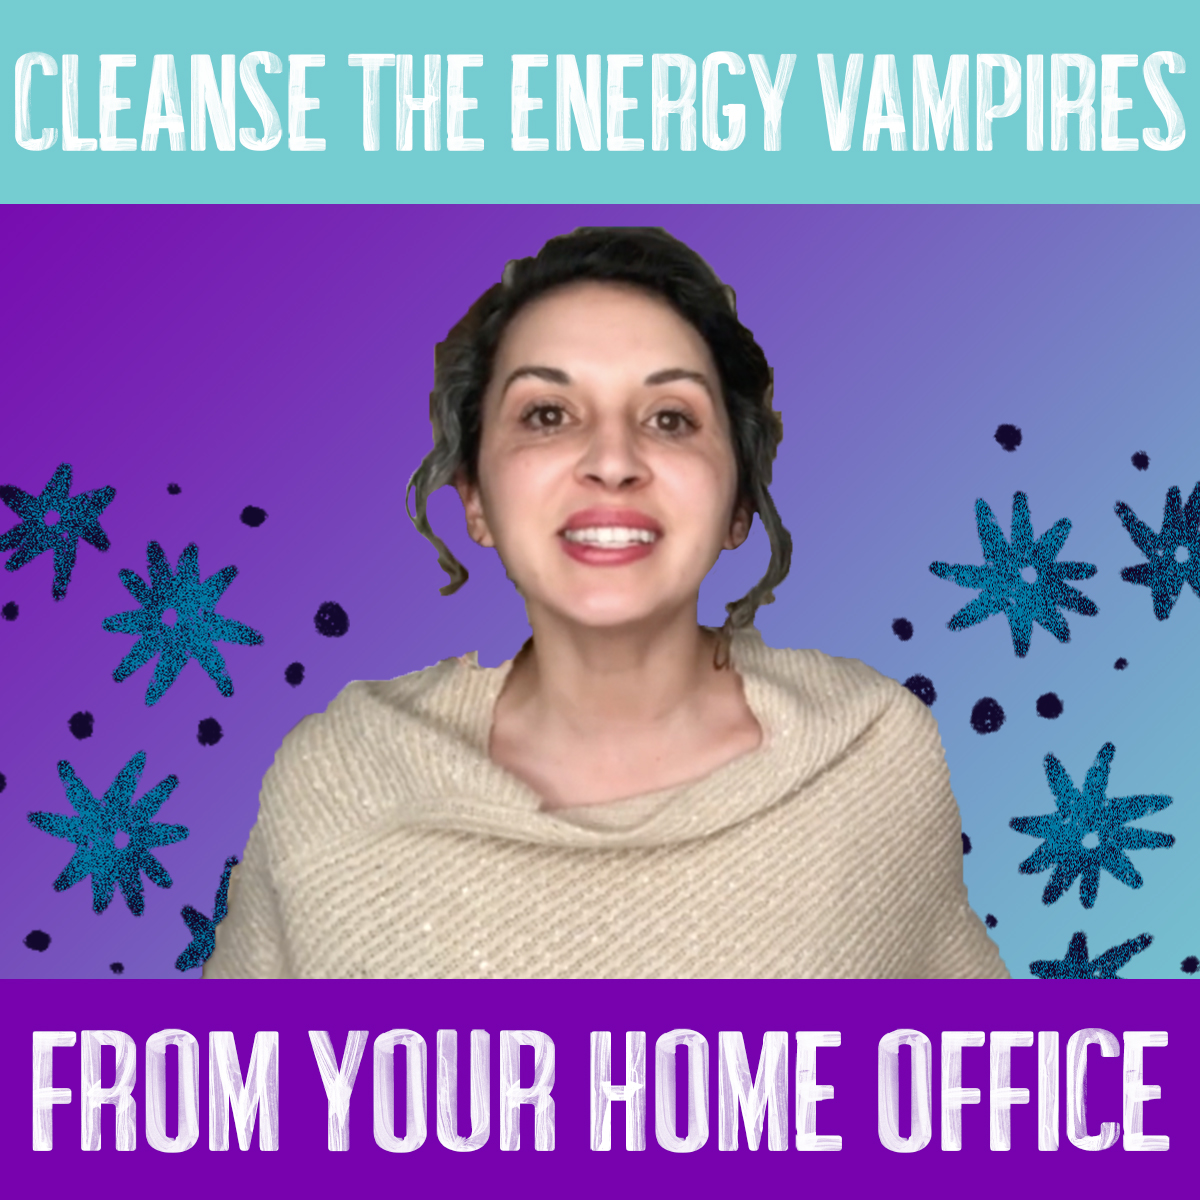 cleanse_energy_vampires_from_your_home_office